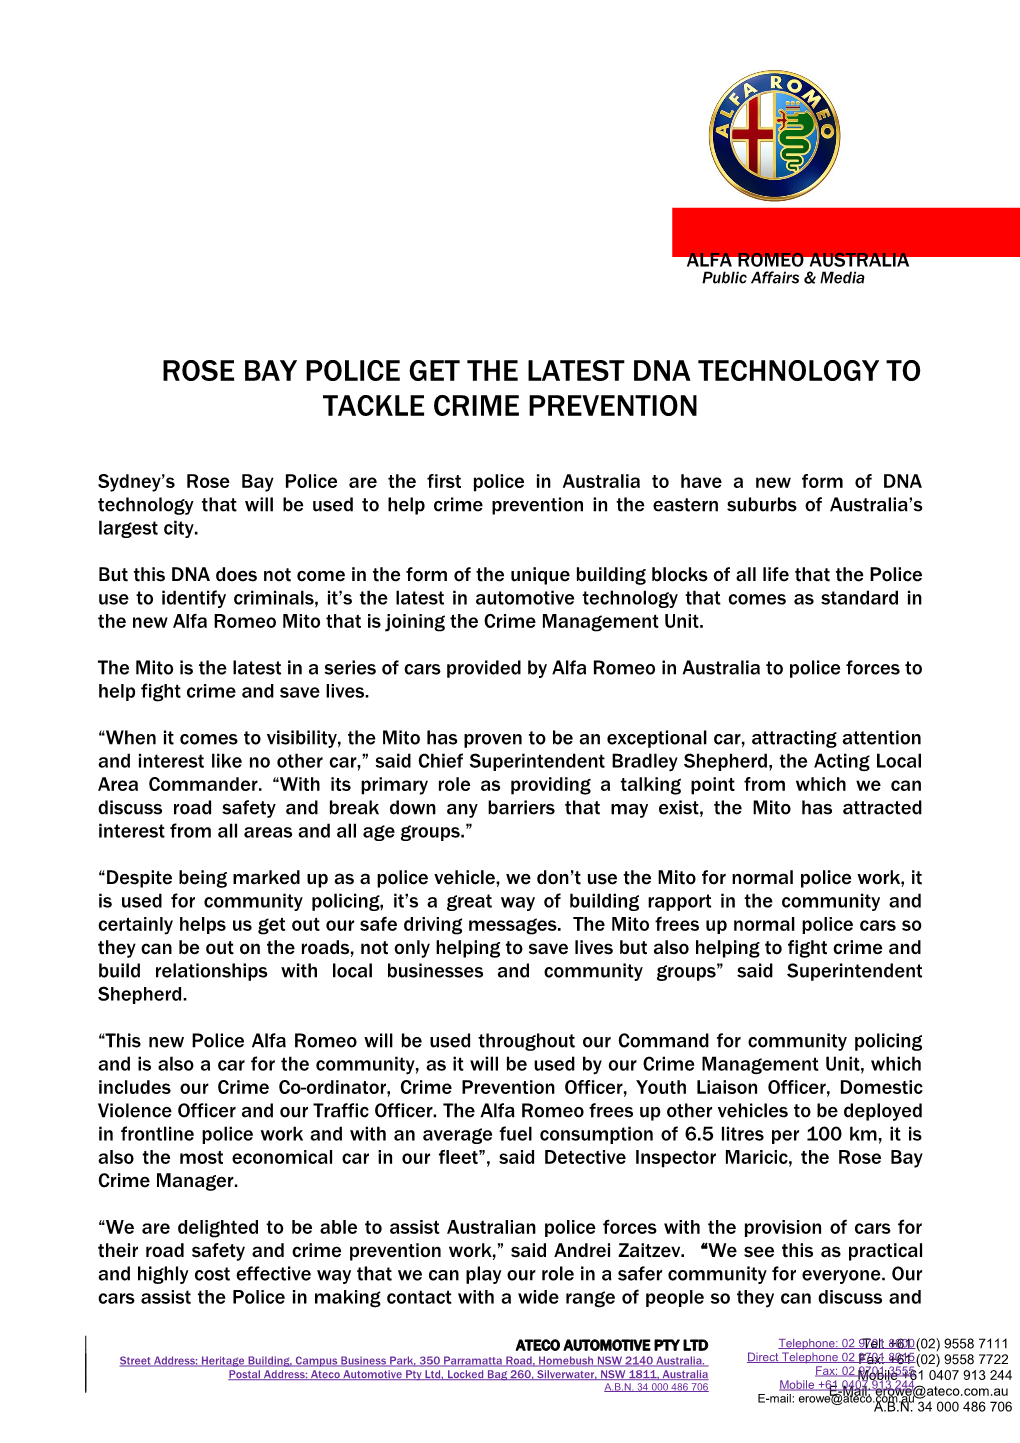 Rose Bay Police Get the Latest Dna Technology to Tackle Crime Prevention